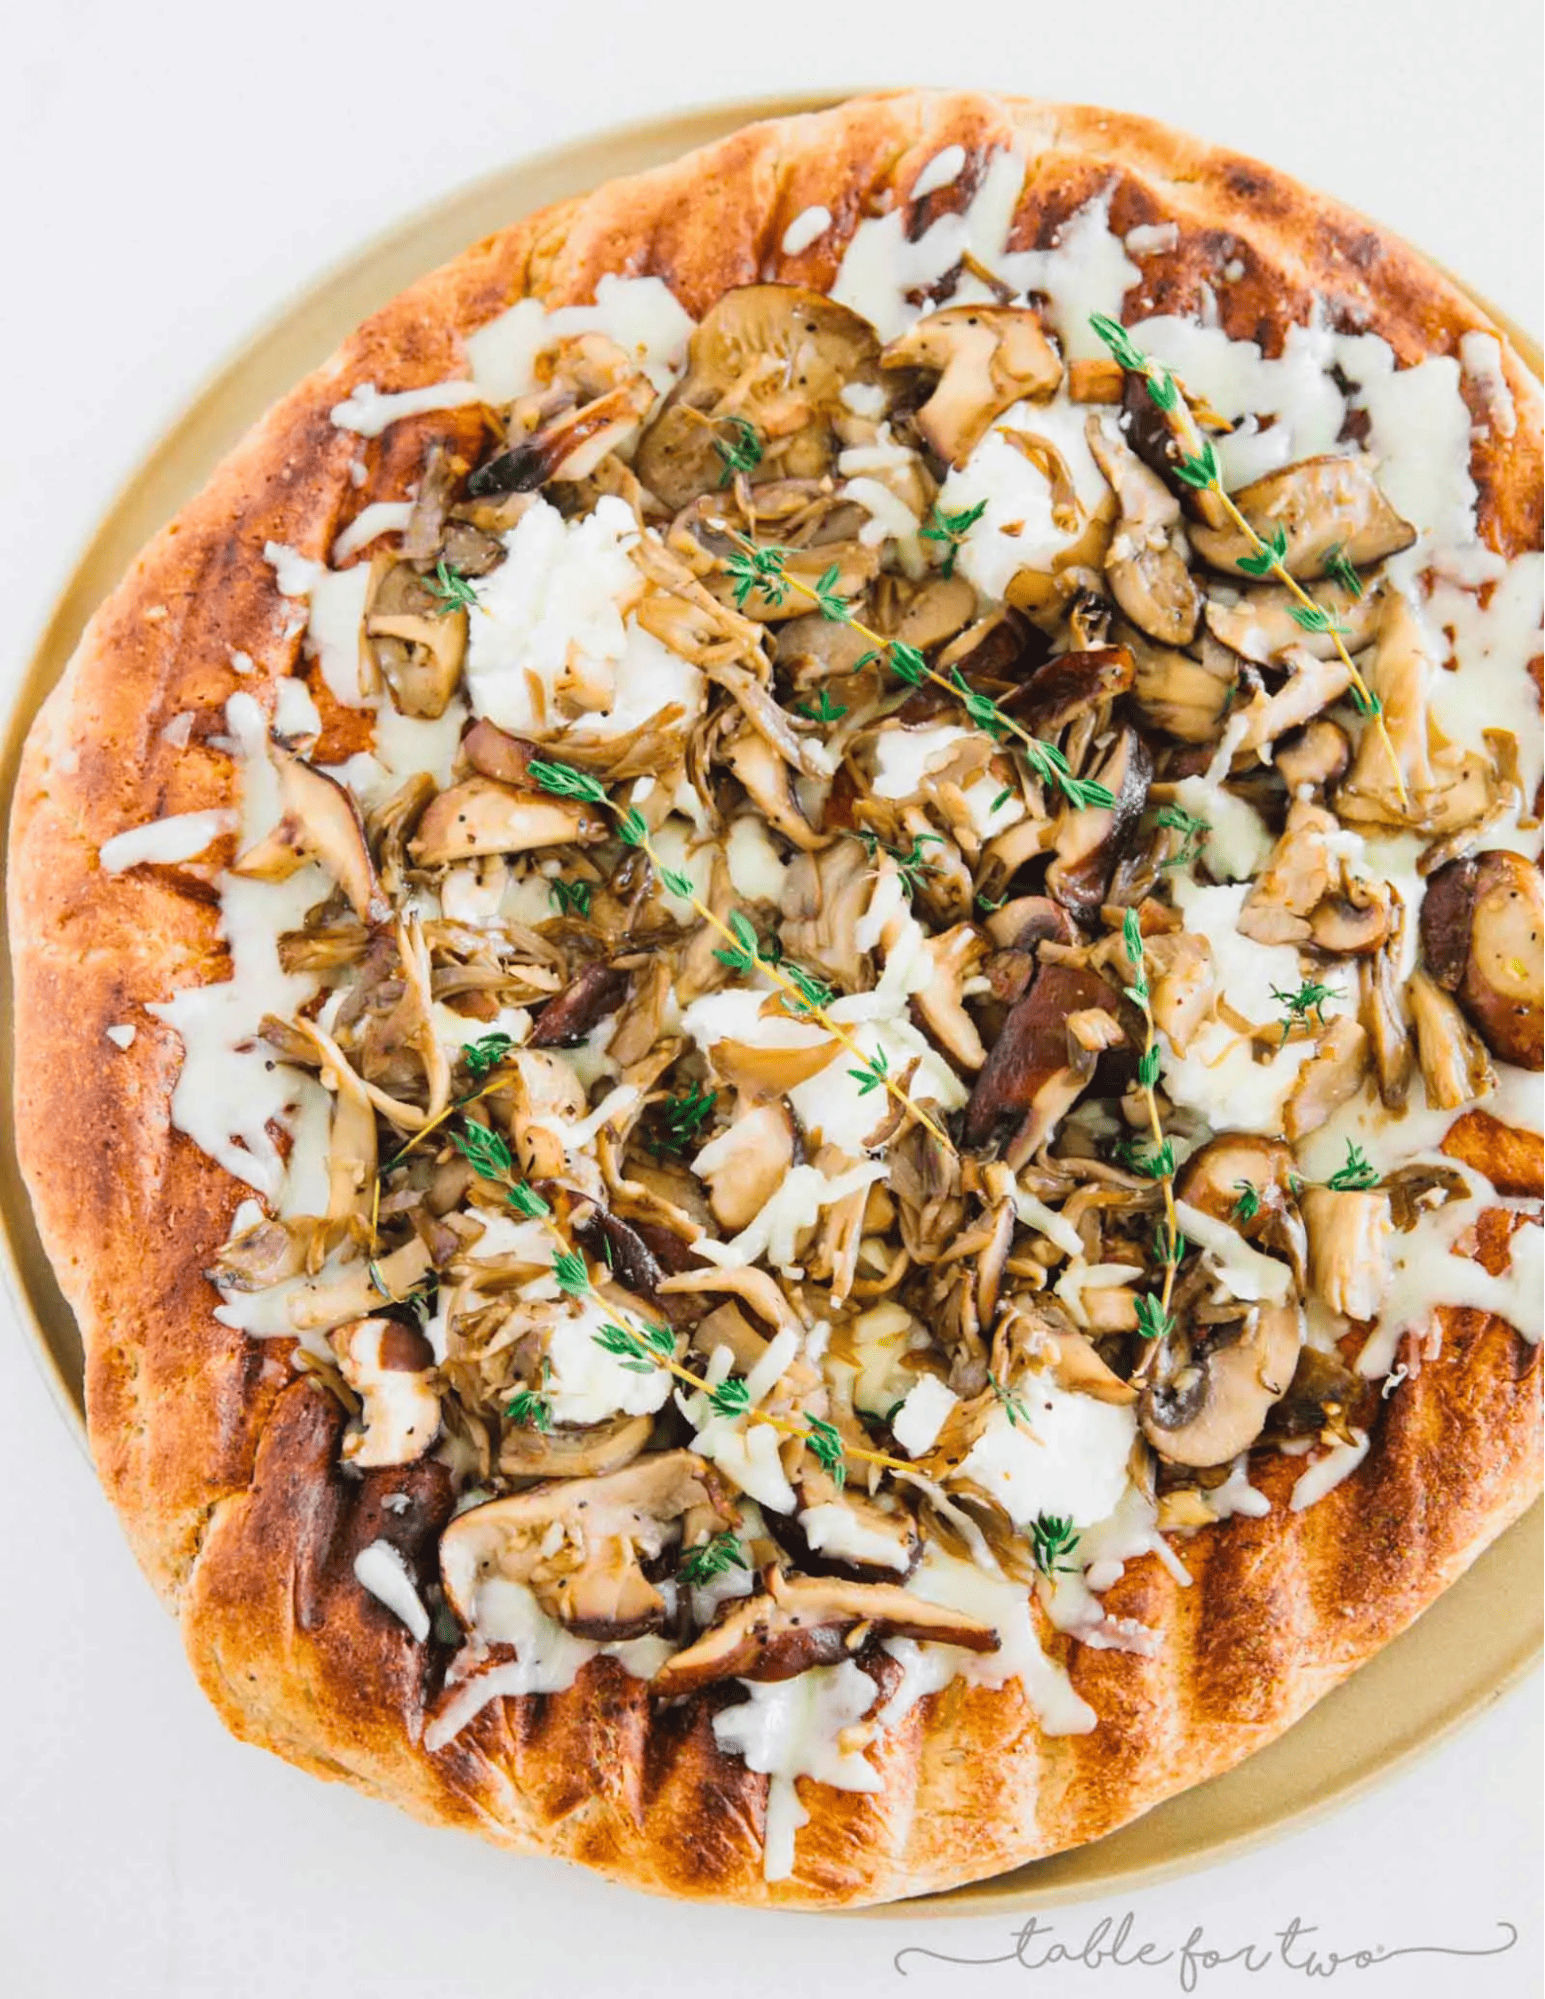 Triple Mushroom and Herb Grilled Pizza